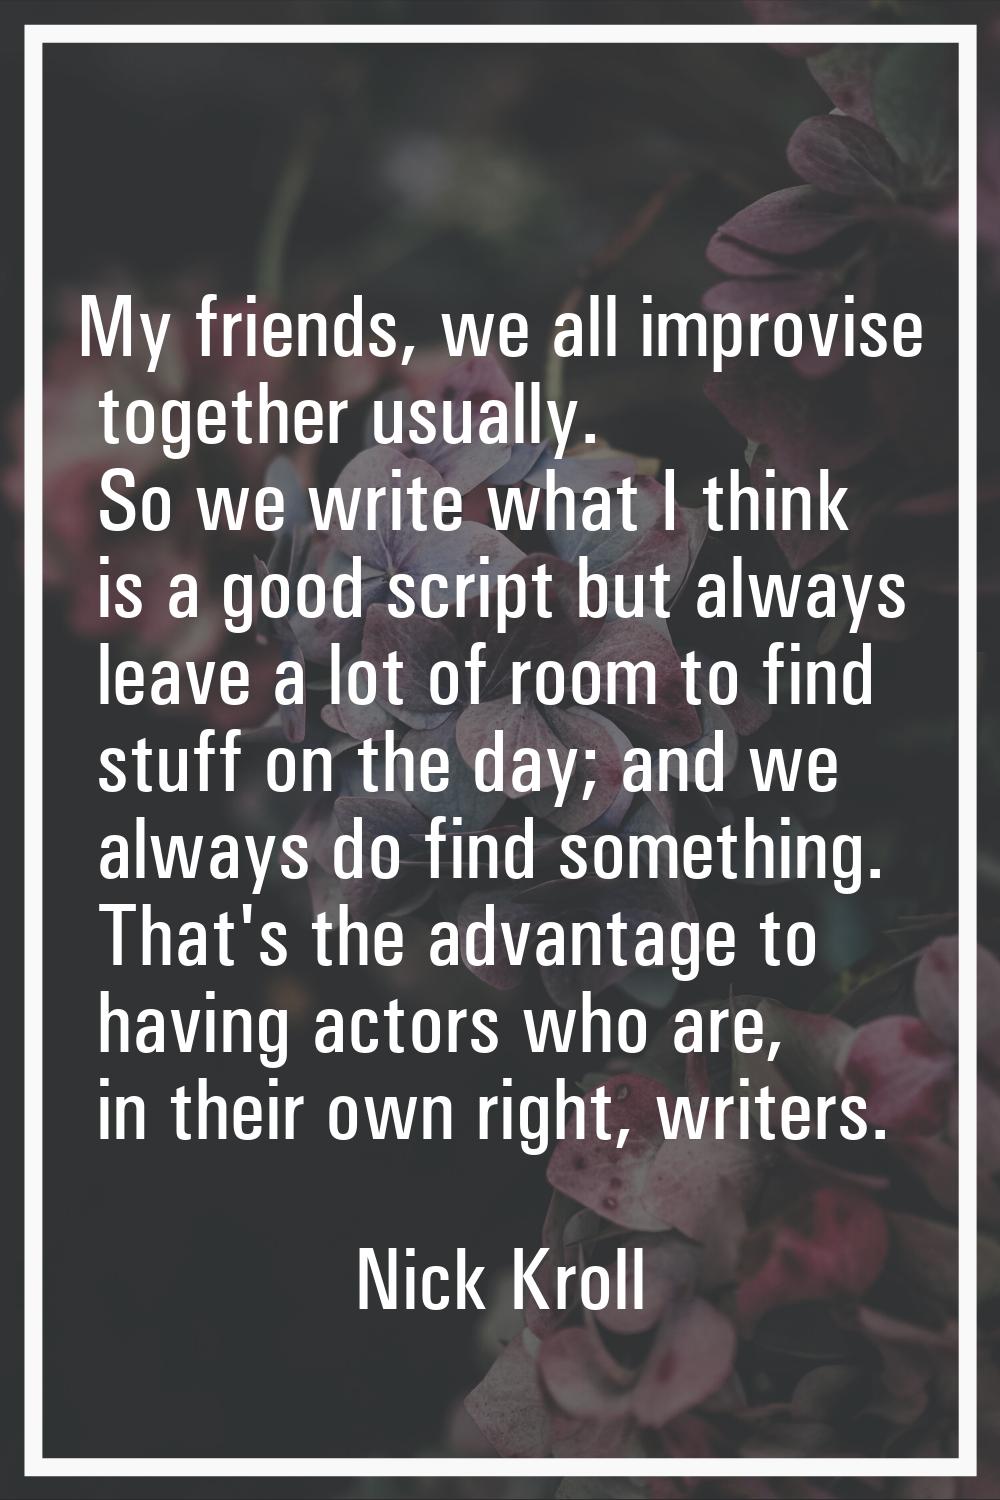 My friends, we all improvise together usually. So we write what I think is a good script but always